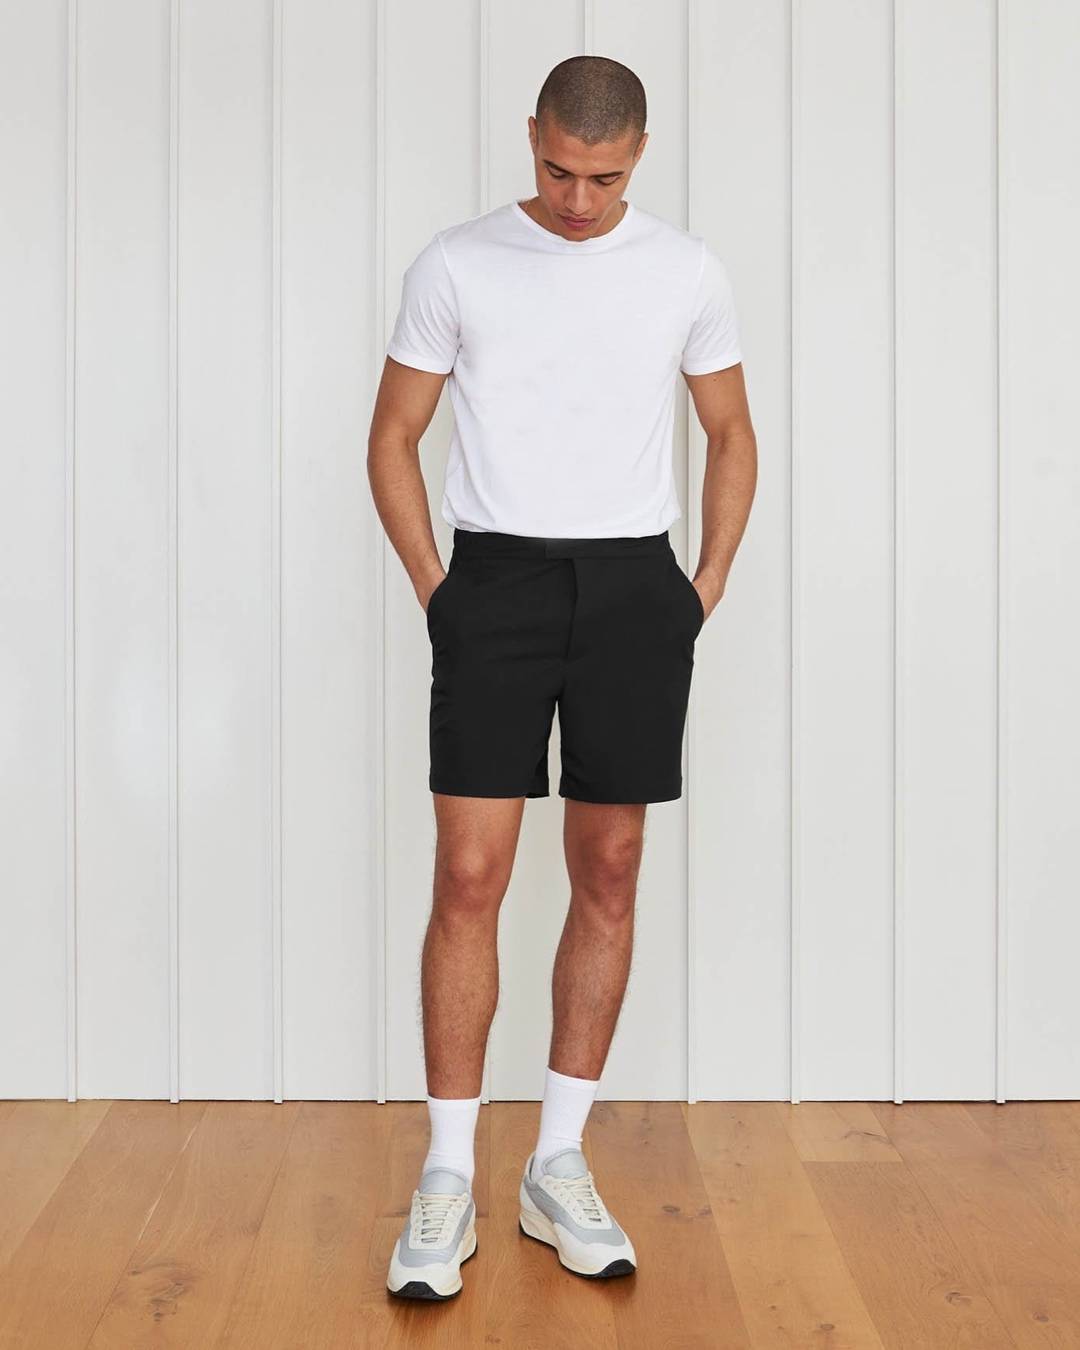 The Anywear Short 2.0 || Steel Blue | Recycled nylon without netting ...